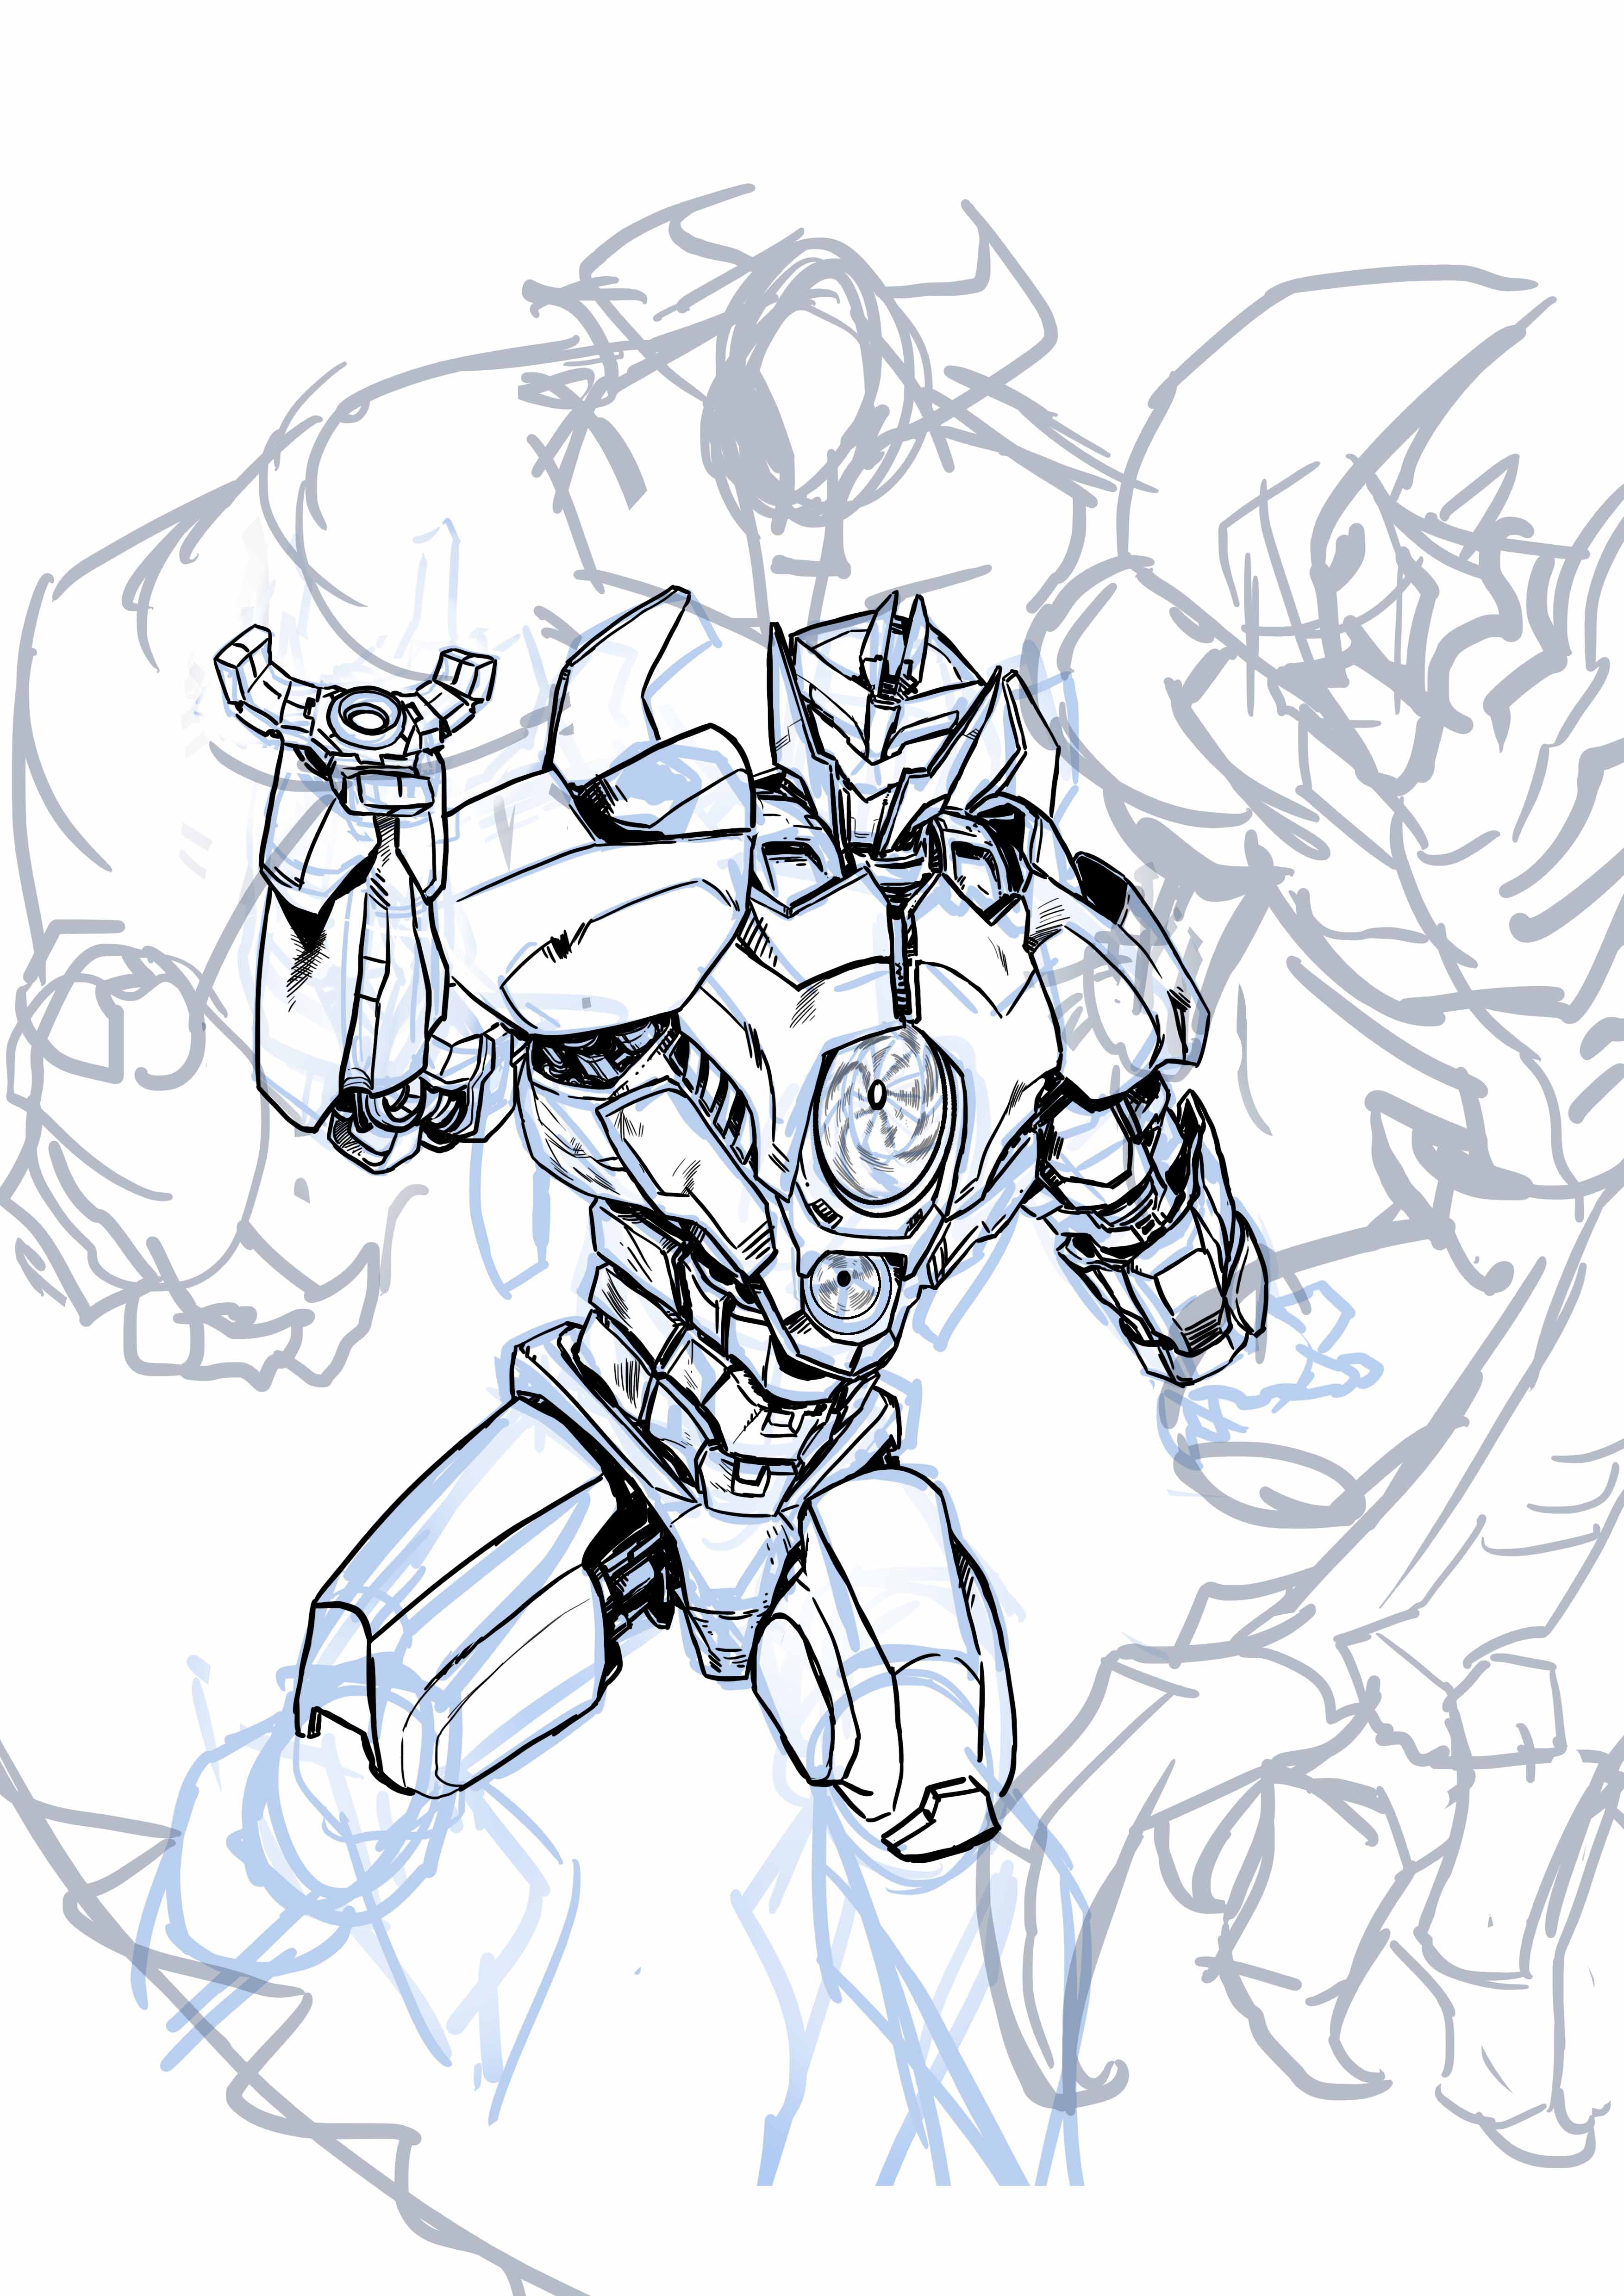 Jaeger wip does anyone want to help me with color